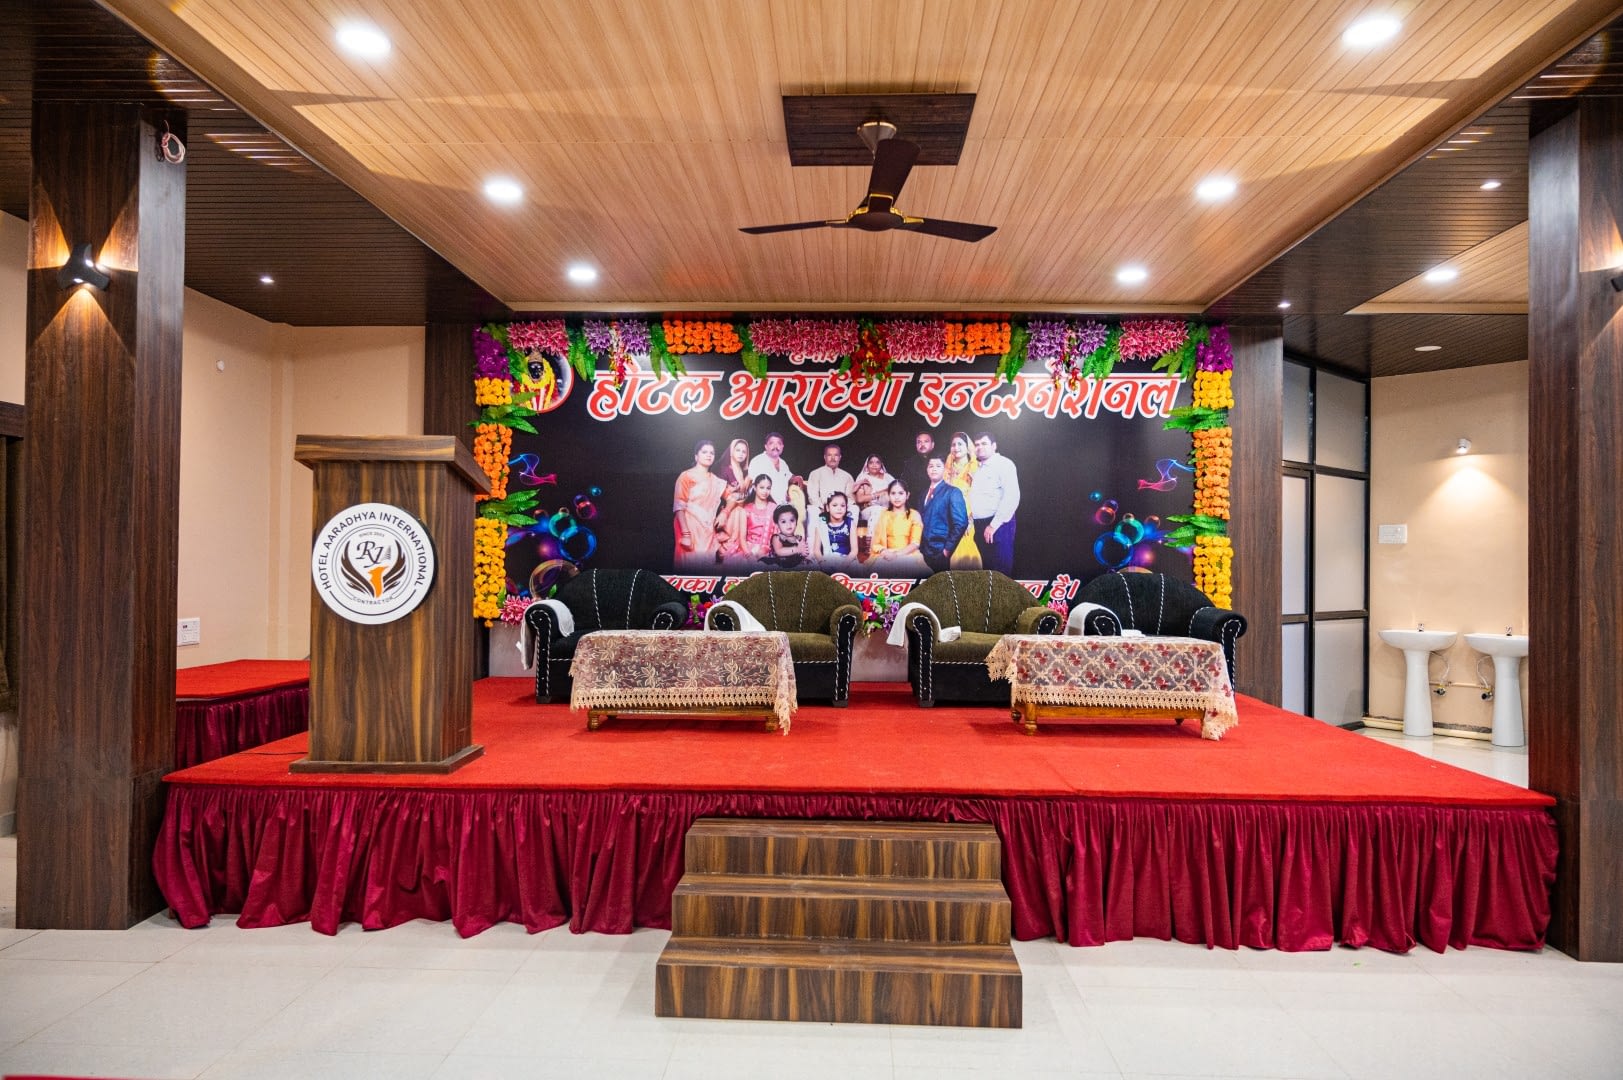 Banquet hall stage